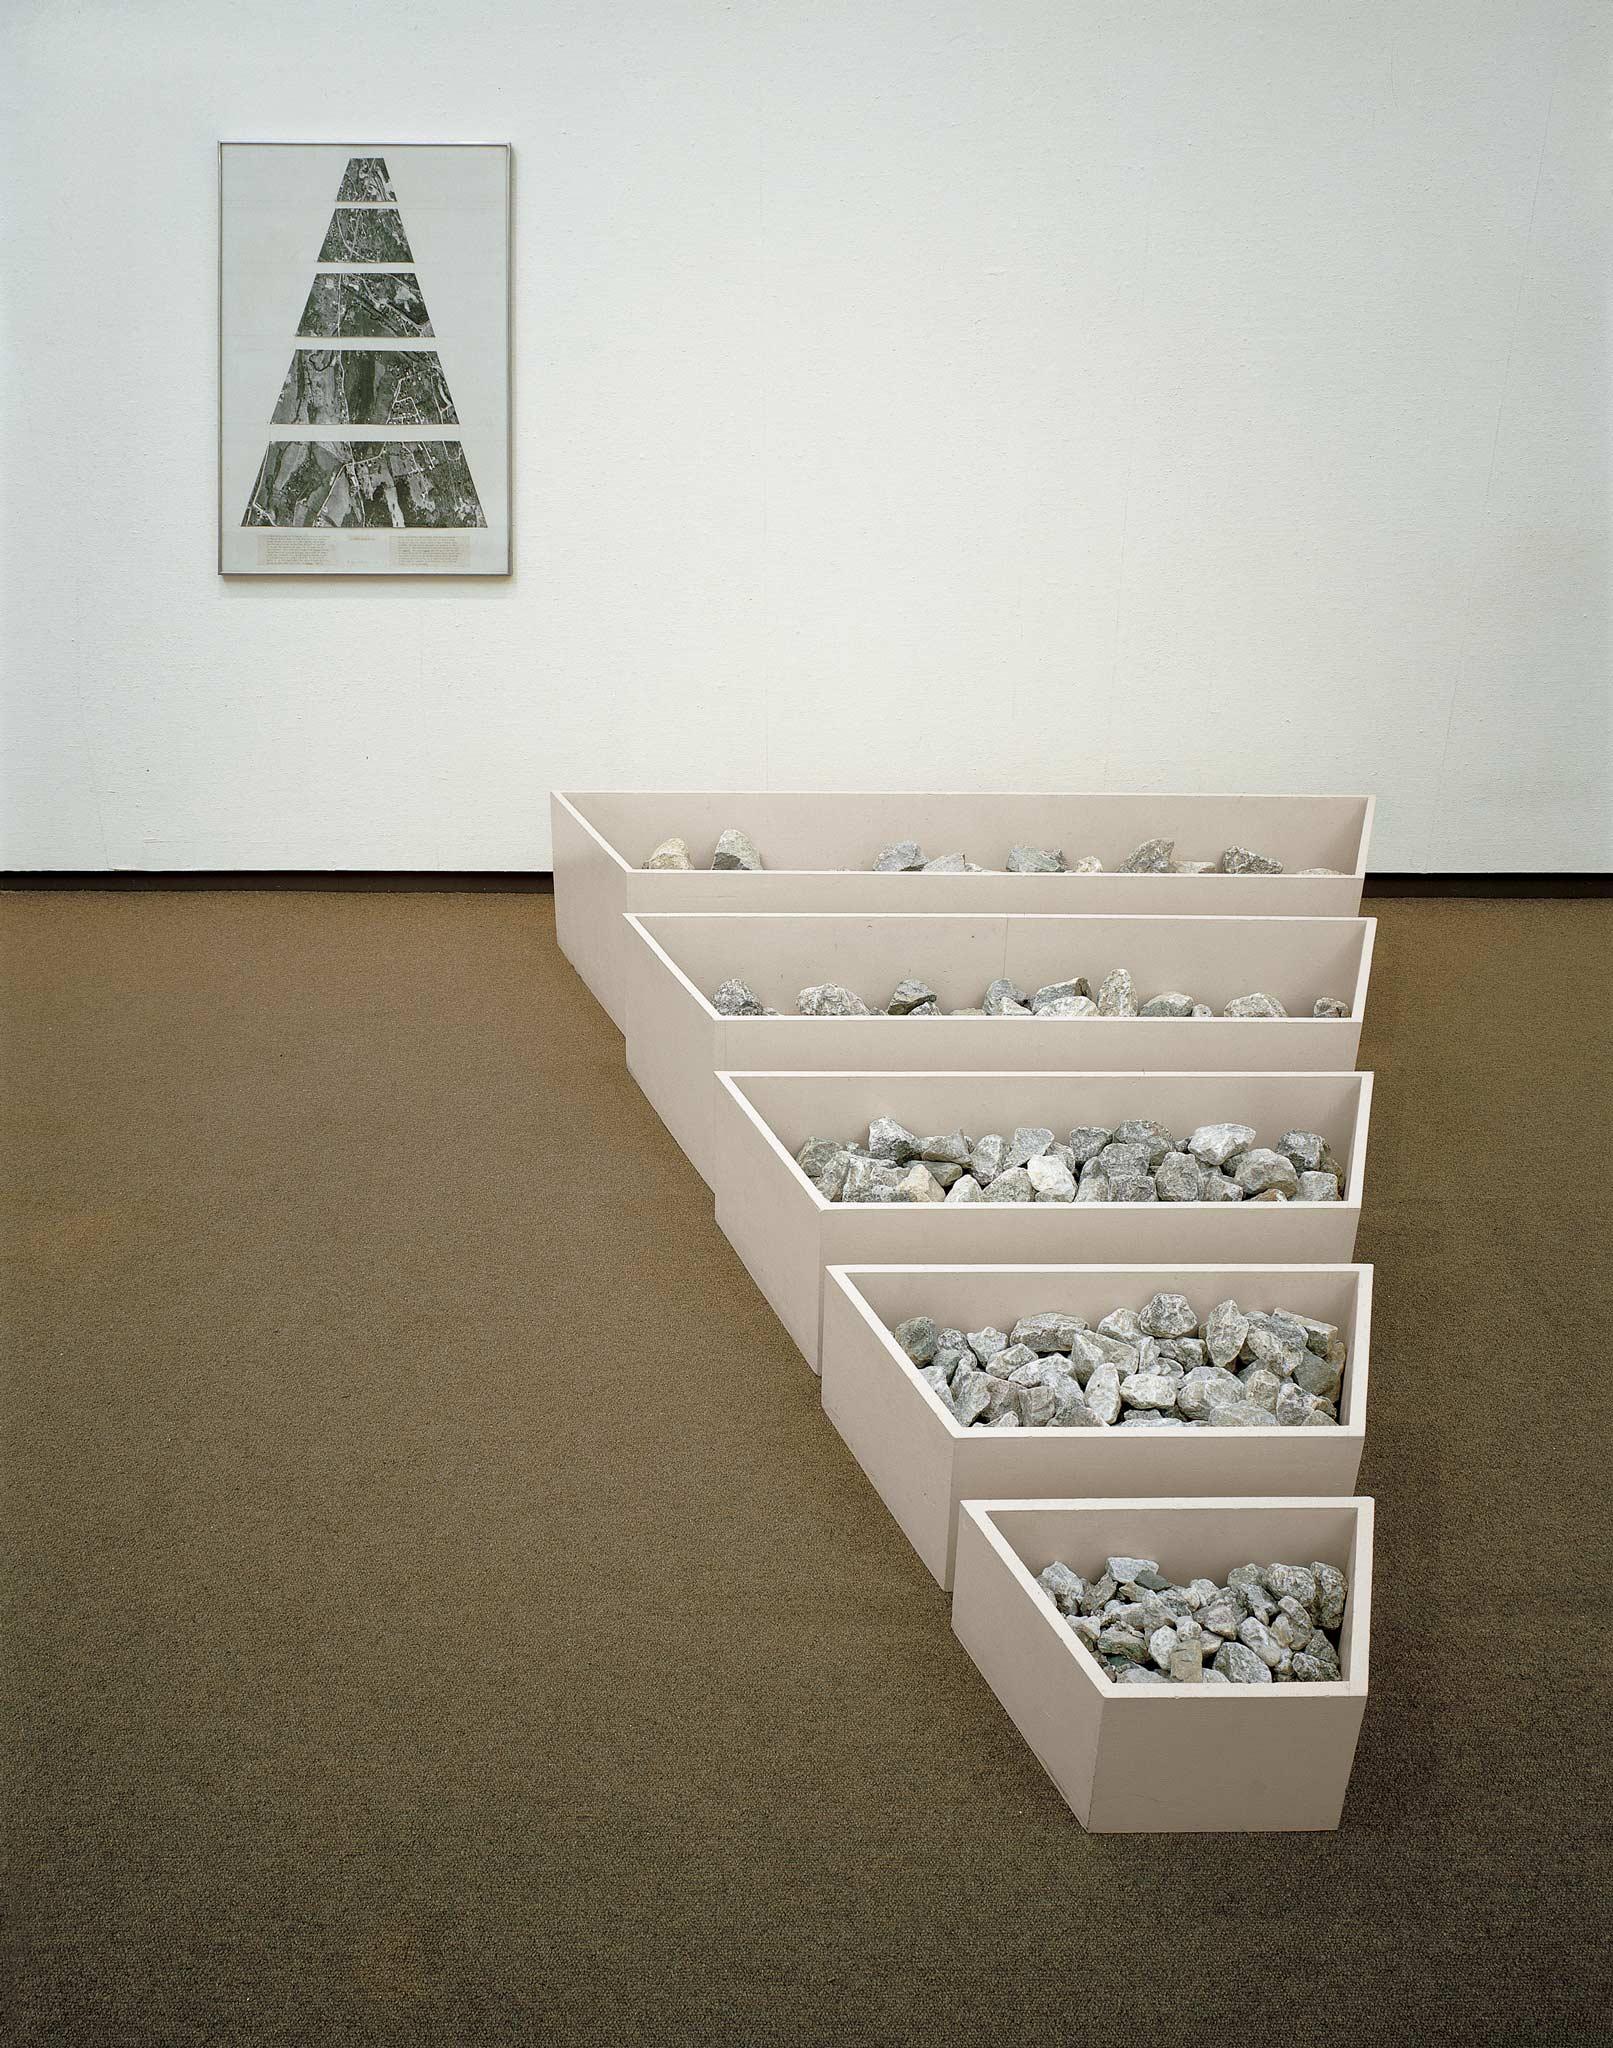 Five low bins full of rocks arranged on the floor from largest to smallest. On the wall is a framed collage of a map that shows the same shapes.